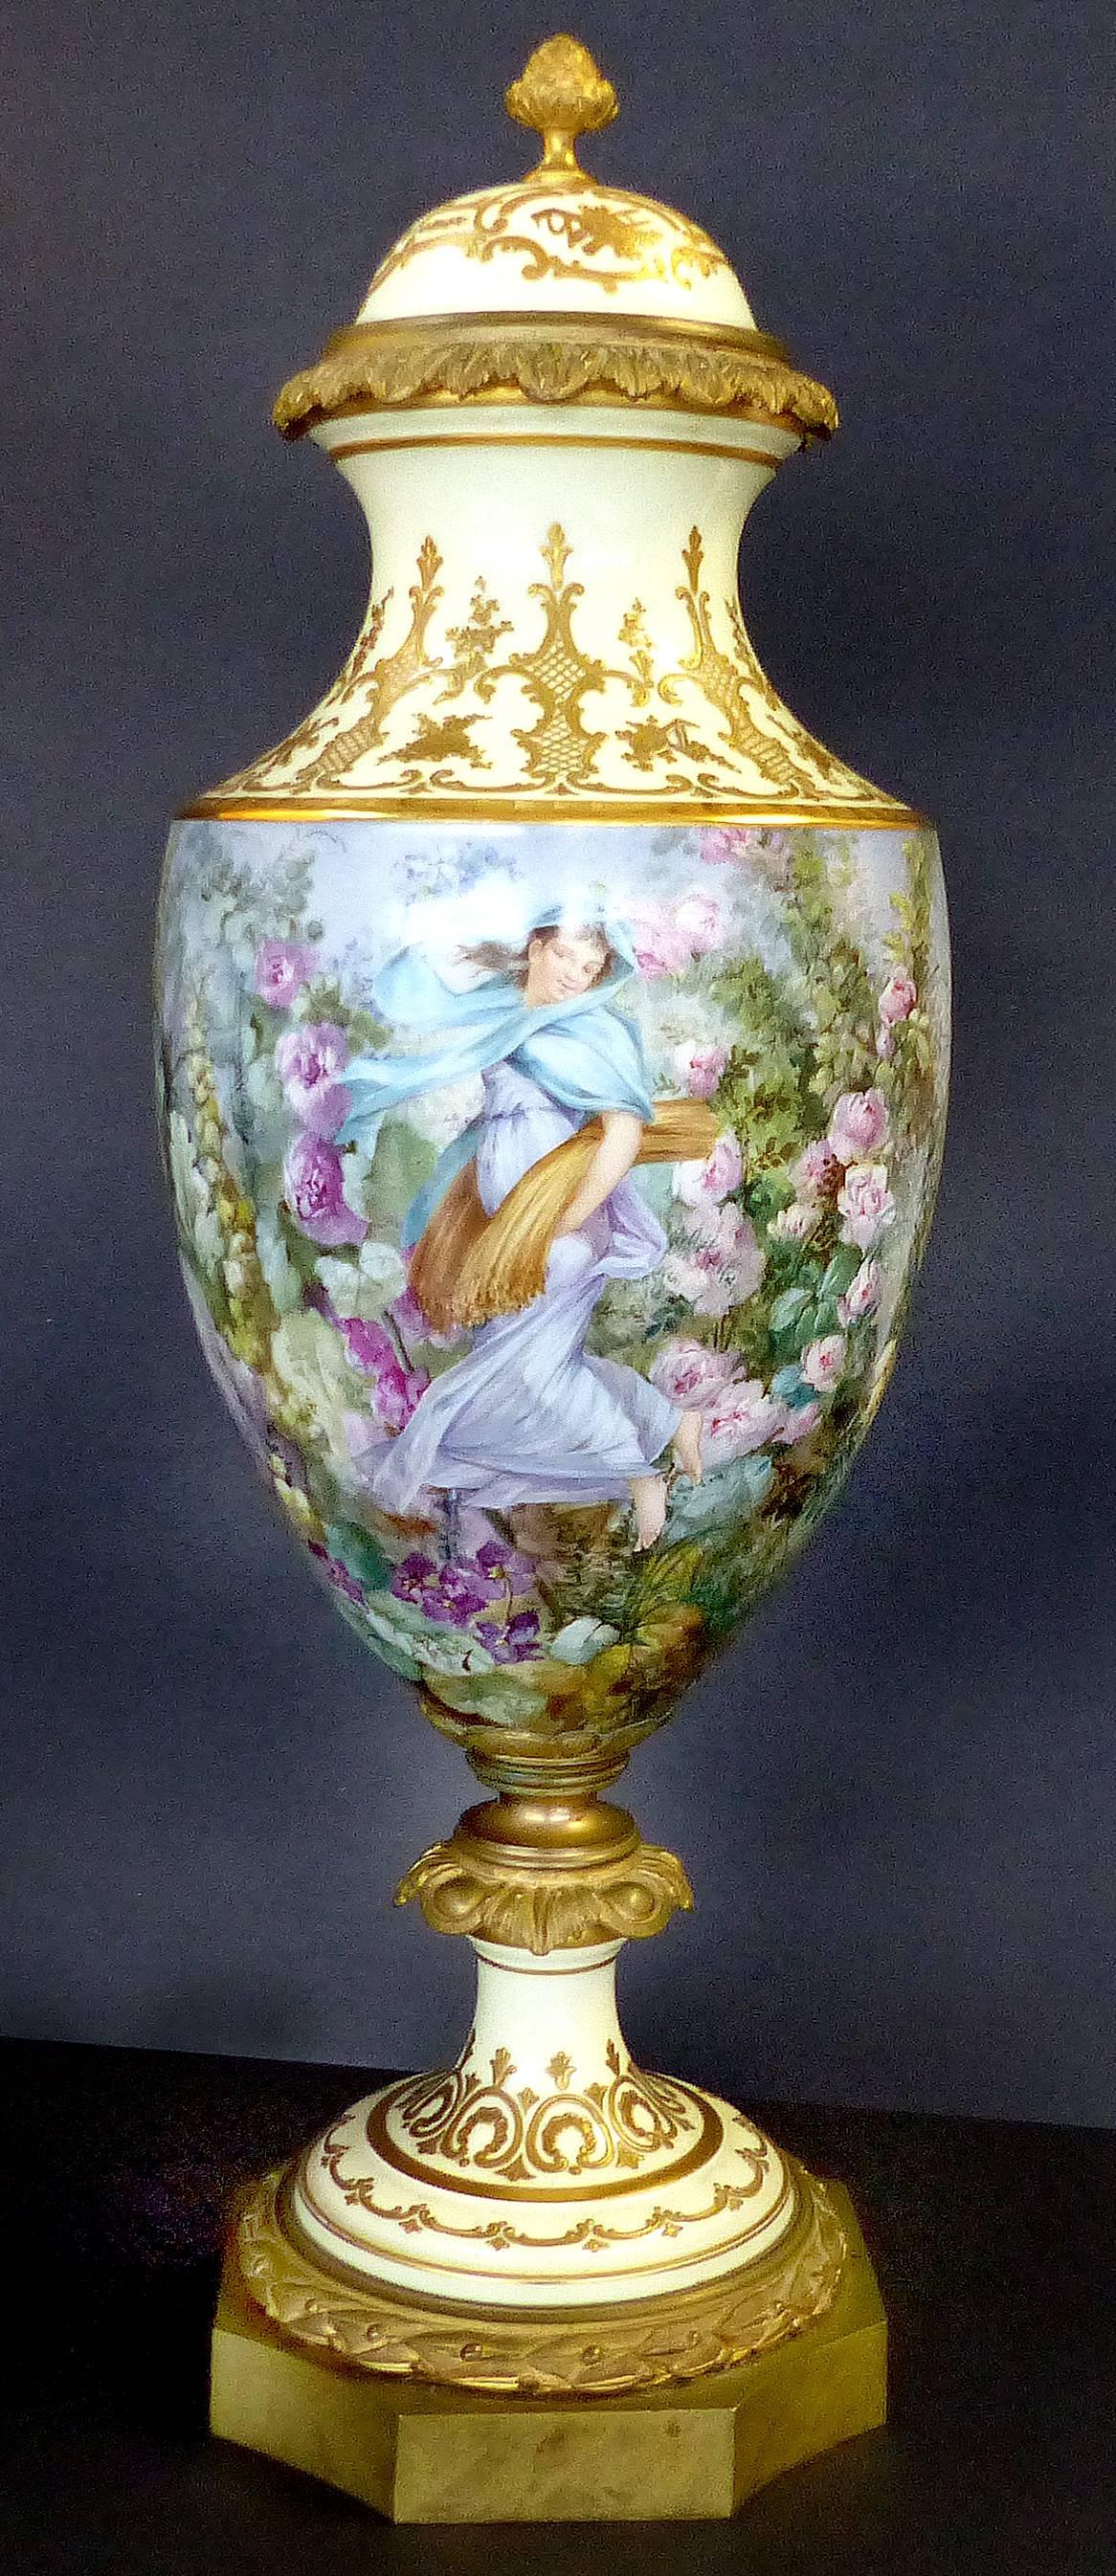 19th Century Hand-Painted Sevres Covered Urn Mounted in Gilt Bronze, Signed

Offered is a fine Sevres hand-painted covered urn signed L. Pater. This gilt bronze mounted covered porcelain urn in three parts, beautifully painted with a harvest scene